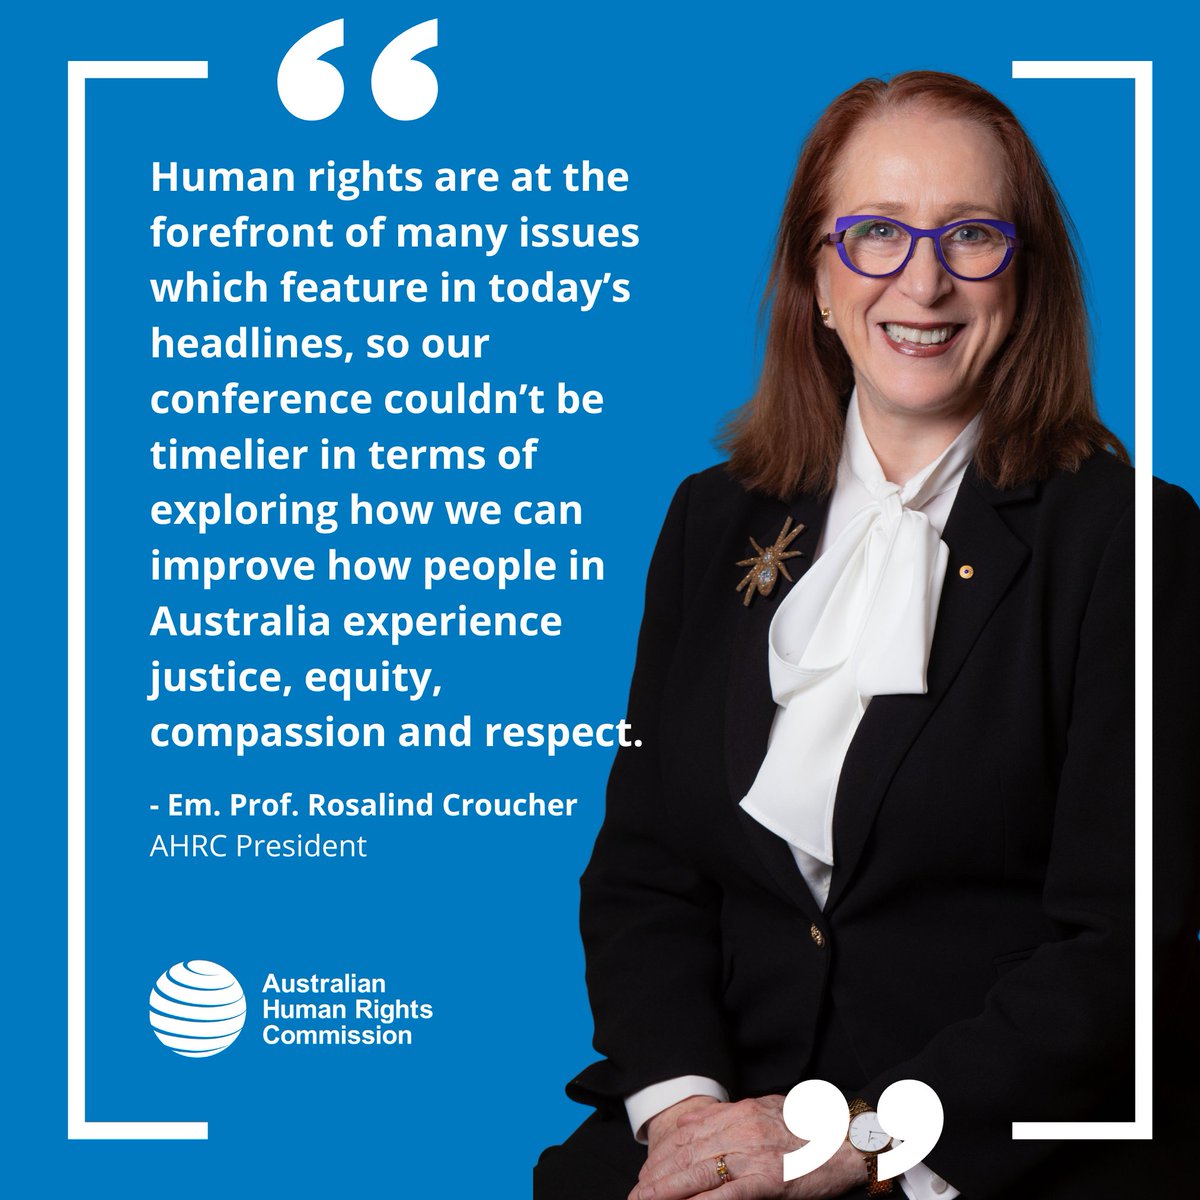 Rights-based solutions to critical social issues are set to take centre stage at our Free + Equal Conference 6-7 June in Sydney. loom.ly/Za_xob8 Don’t miss out. REGISTER NOW: loom.ly/UAOpOrY #AHRC #AusHumanRights #HumanRightsAct